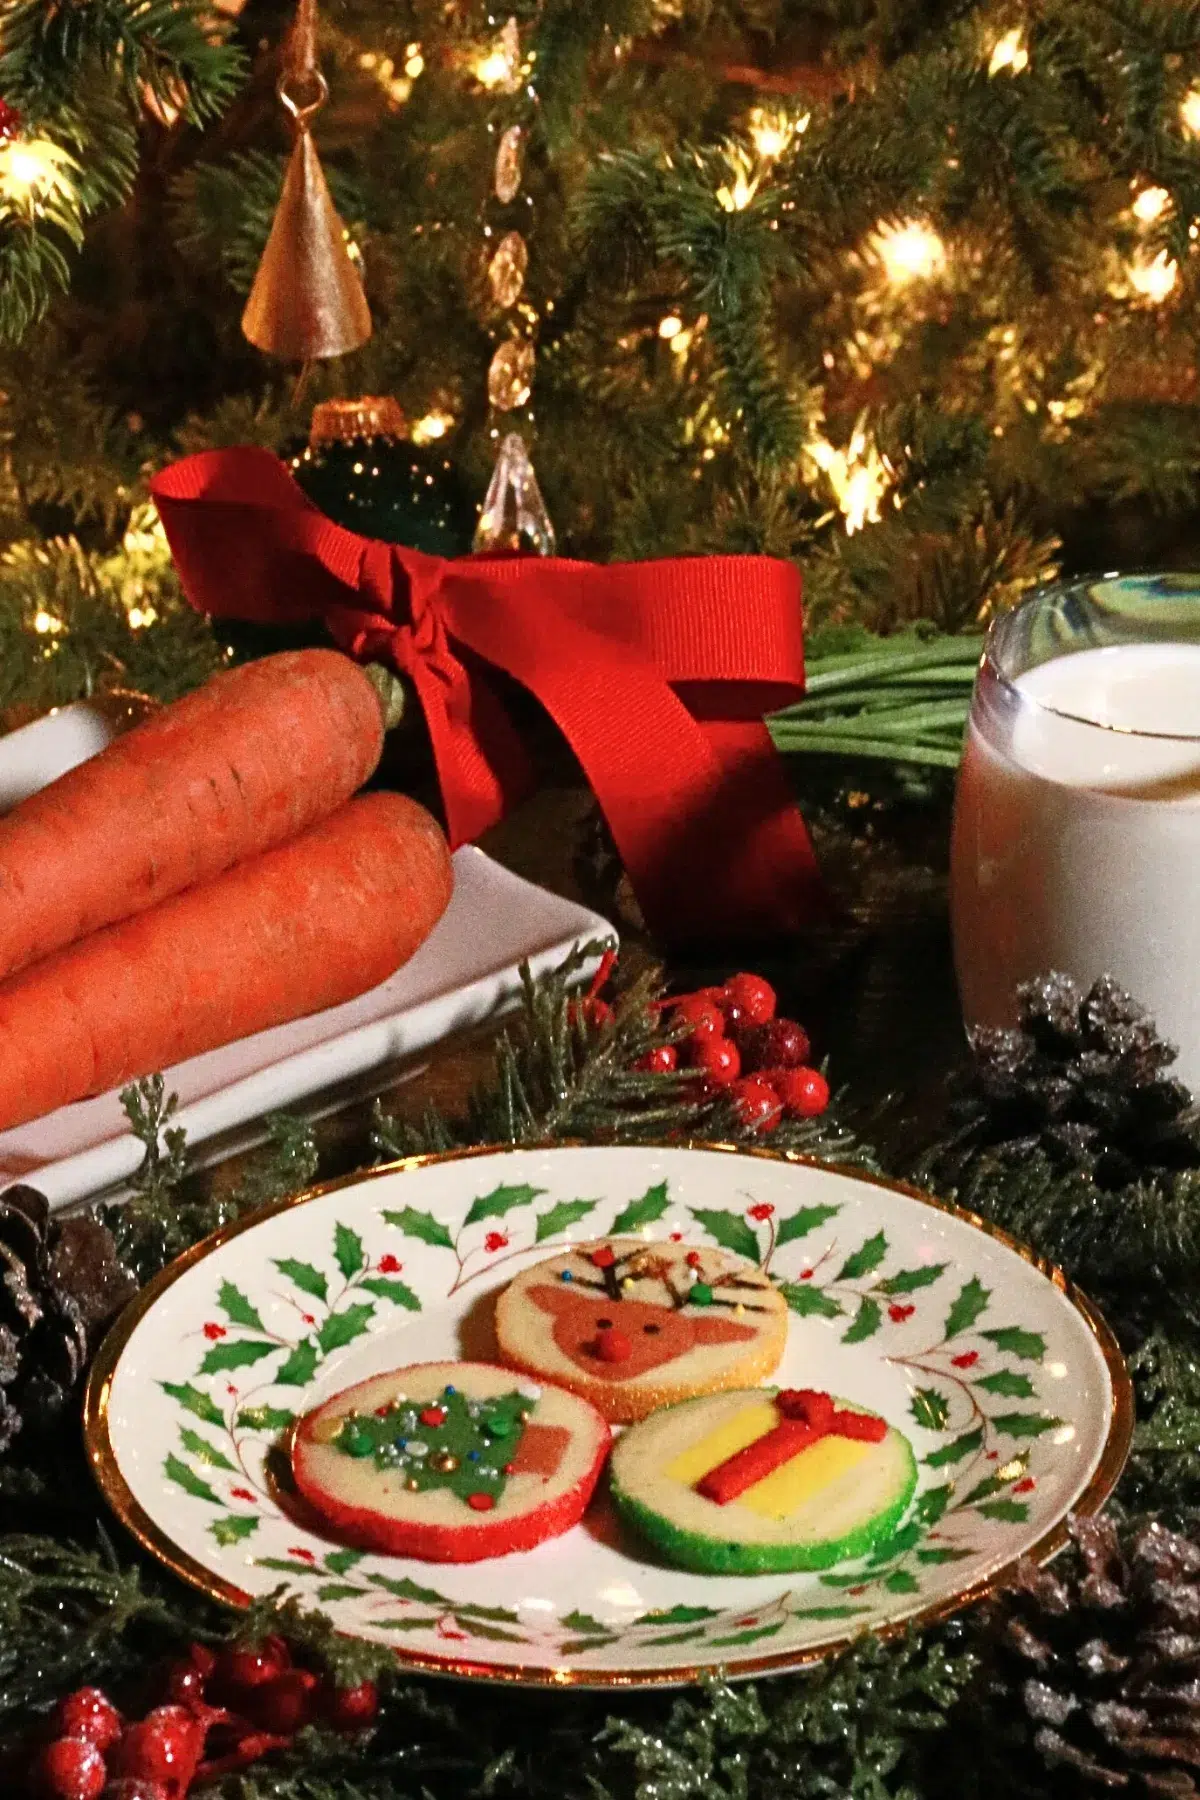 slice-and-bake Christmas cookies on a plate served with carrot and milk